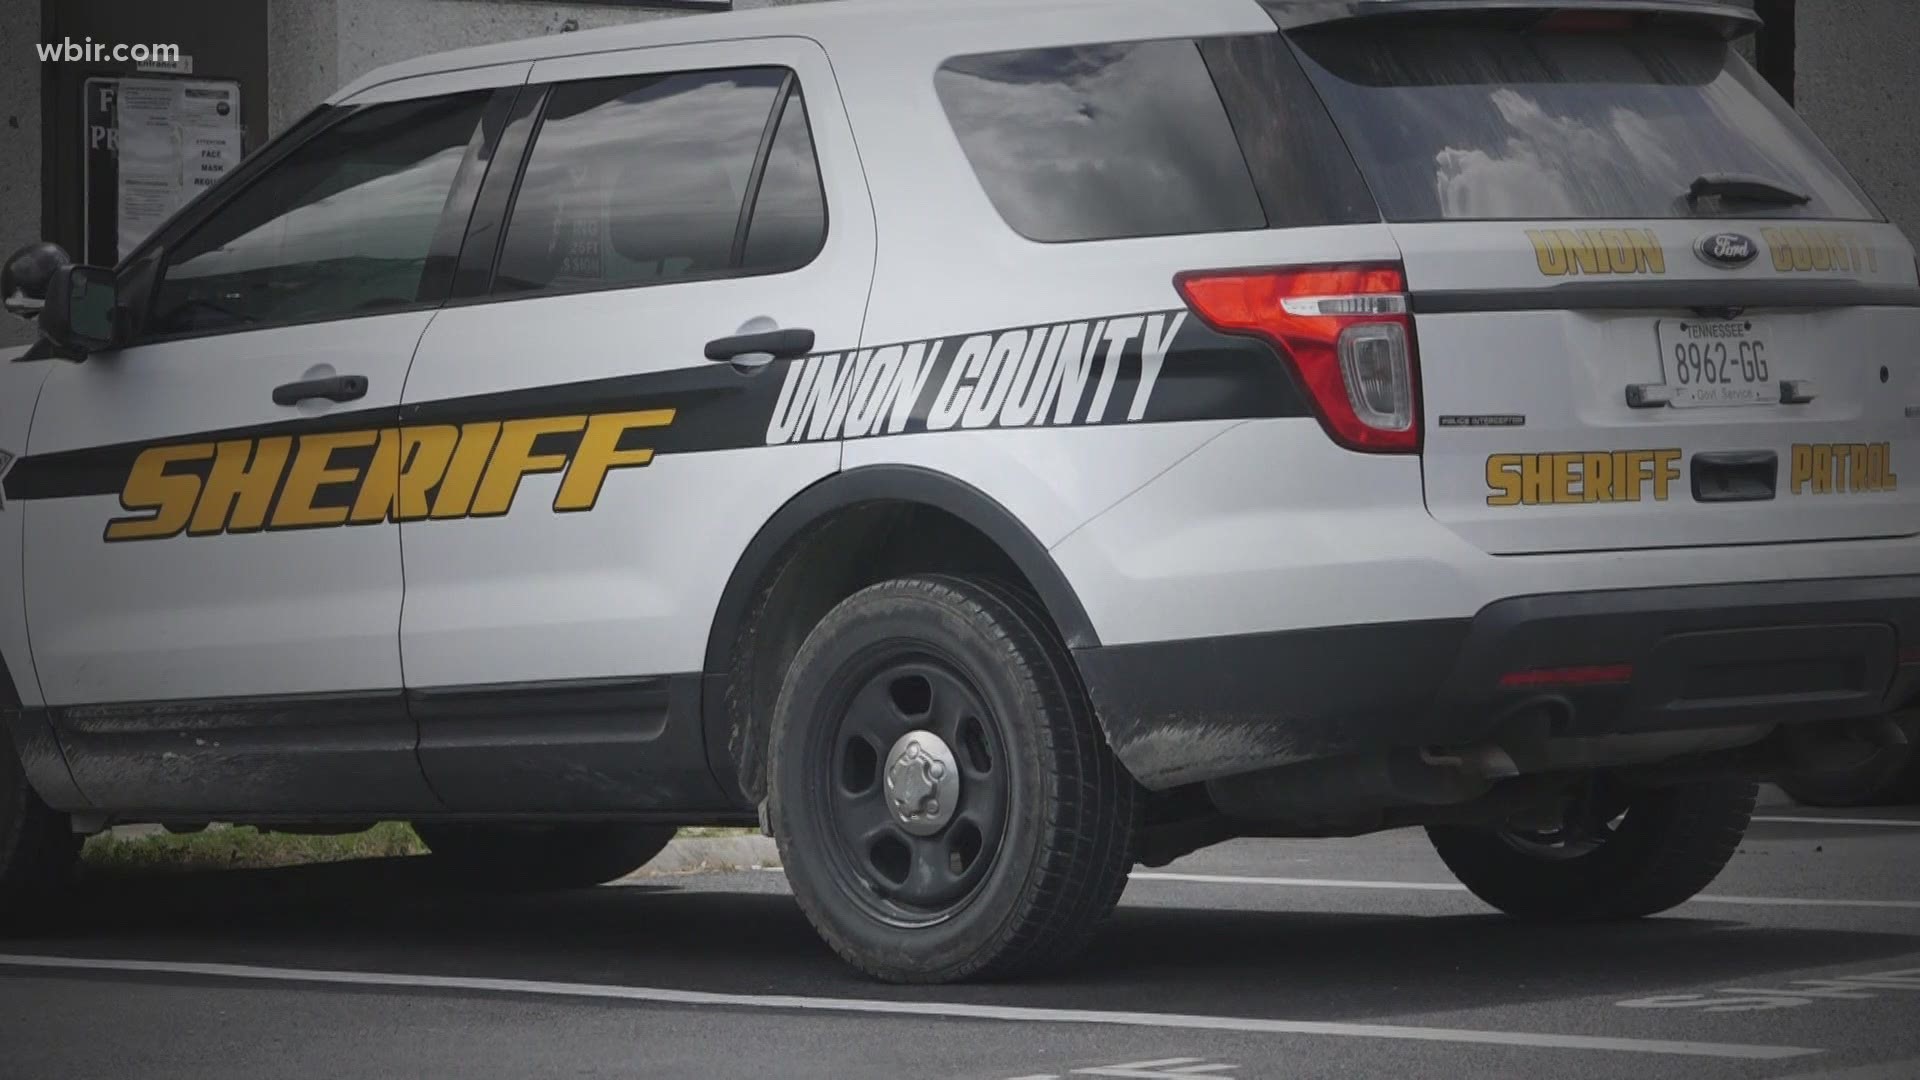 Sheriff's deputies used an answer key to take a required state test and got paid taxpayer money for passing, according to Tennessee investigators.